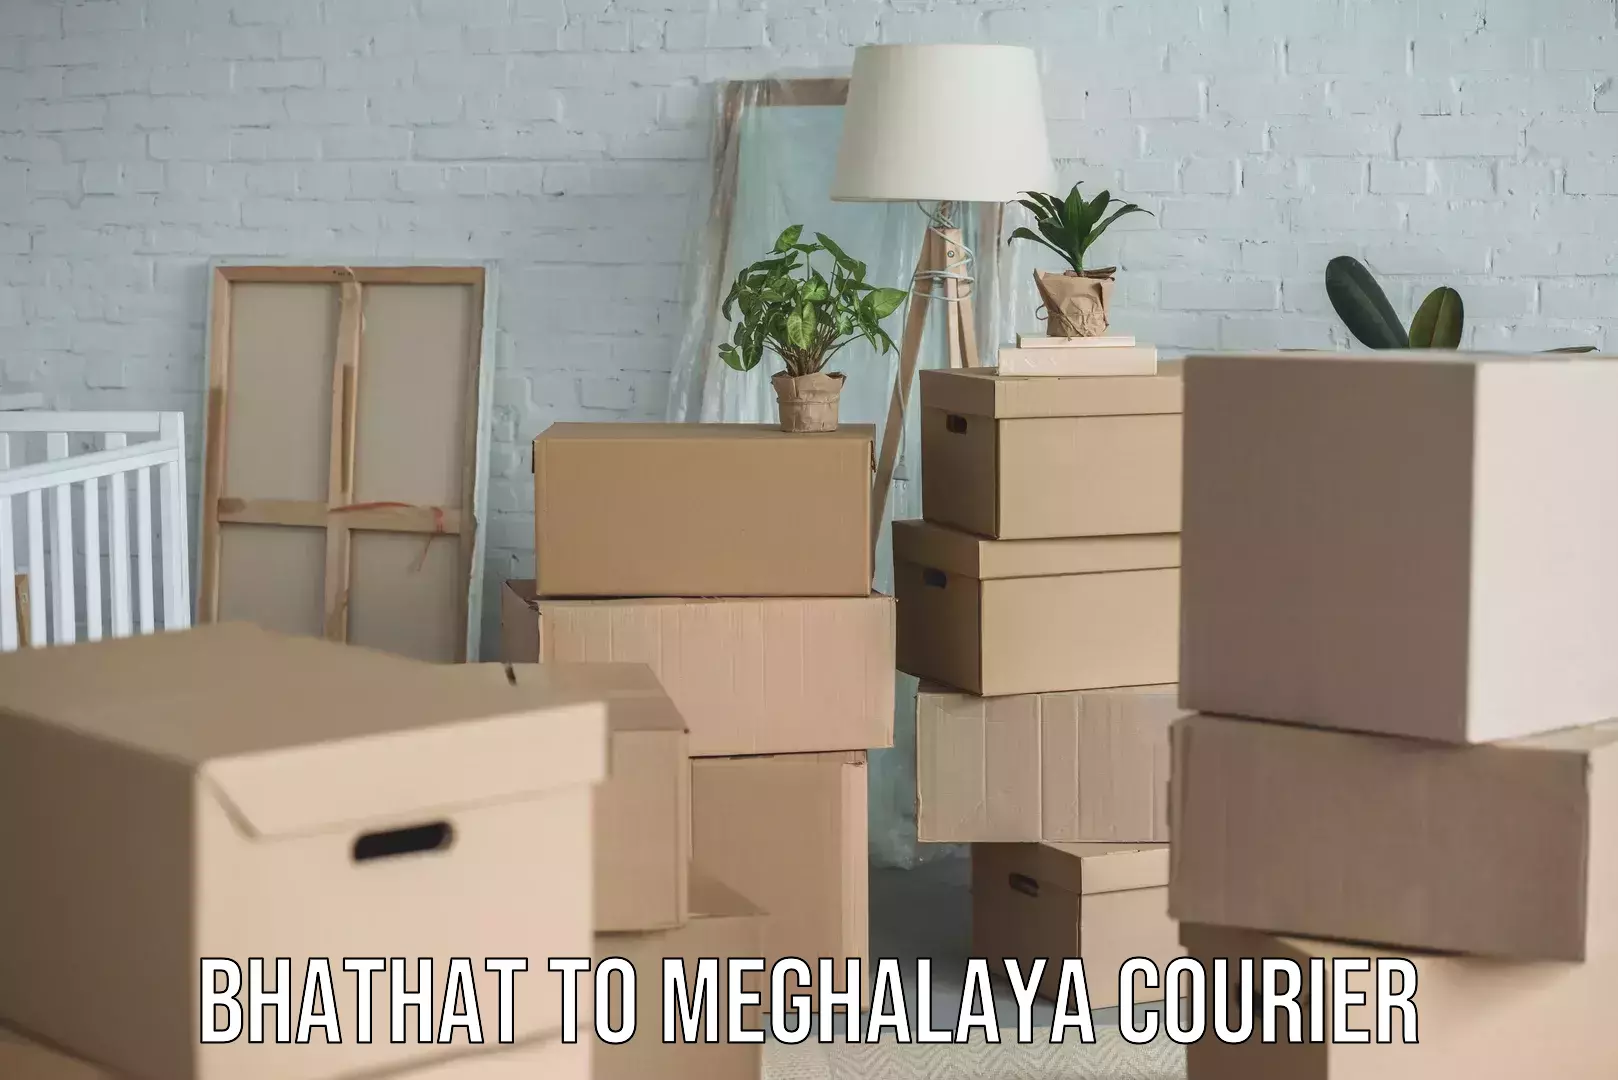 Efficient parcel delivery Bhathat to Meghalaya